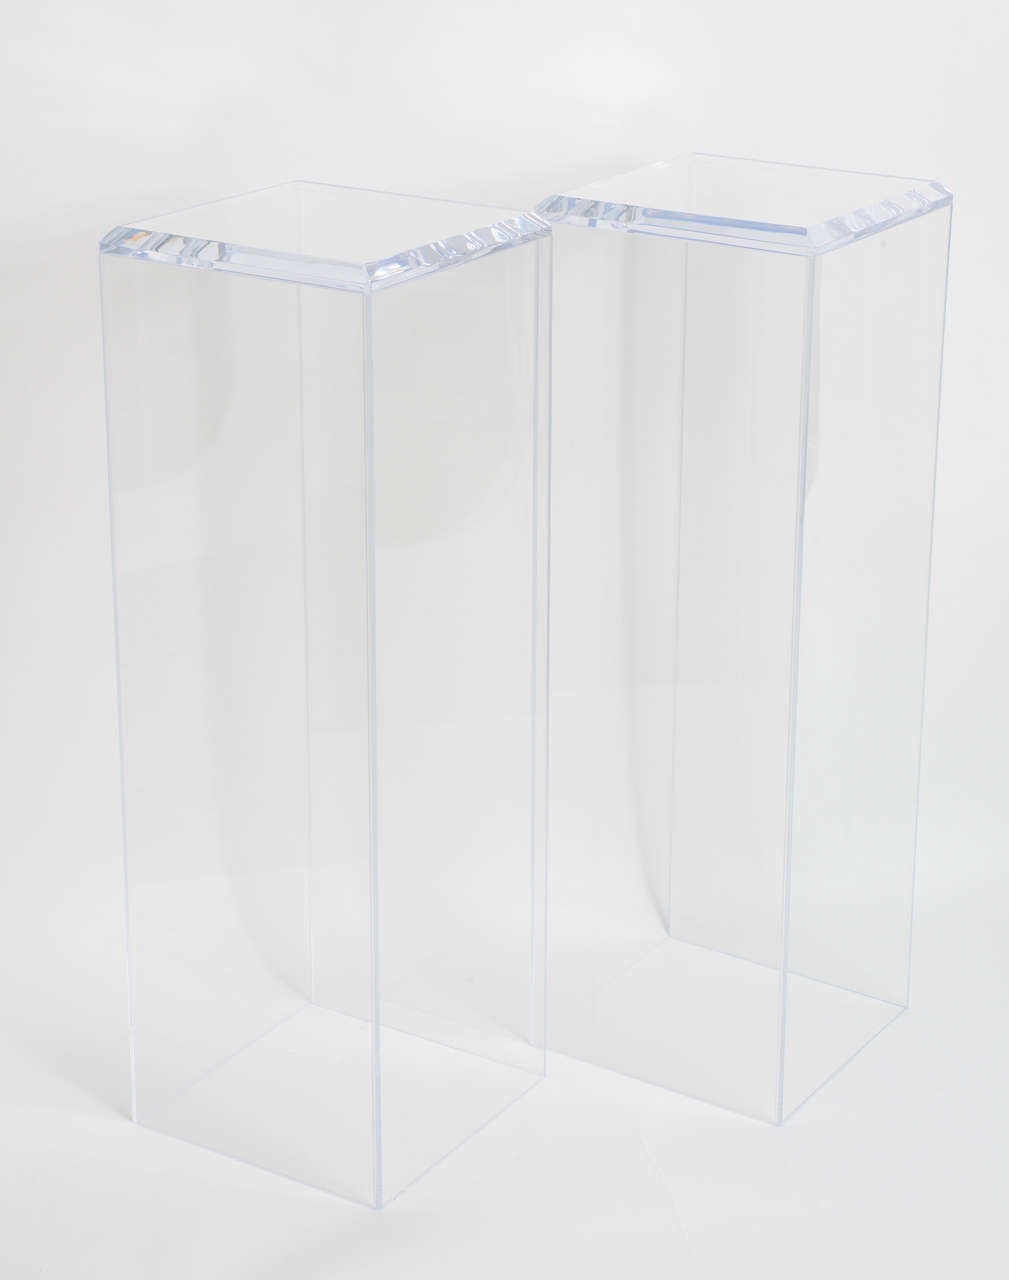 Hand-Crafted Pair of Lucite Pedestals by Iconic Snob Galeries